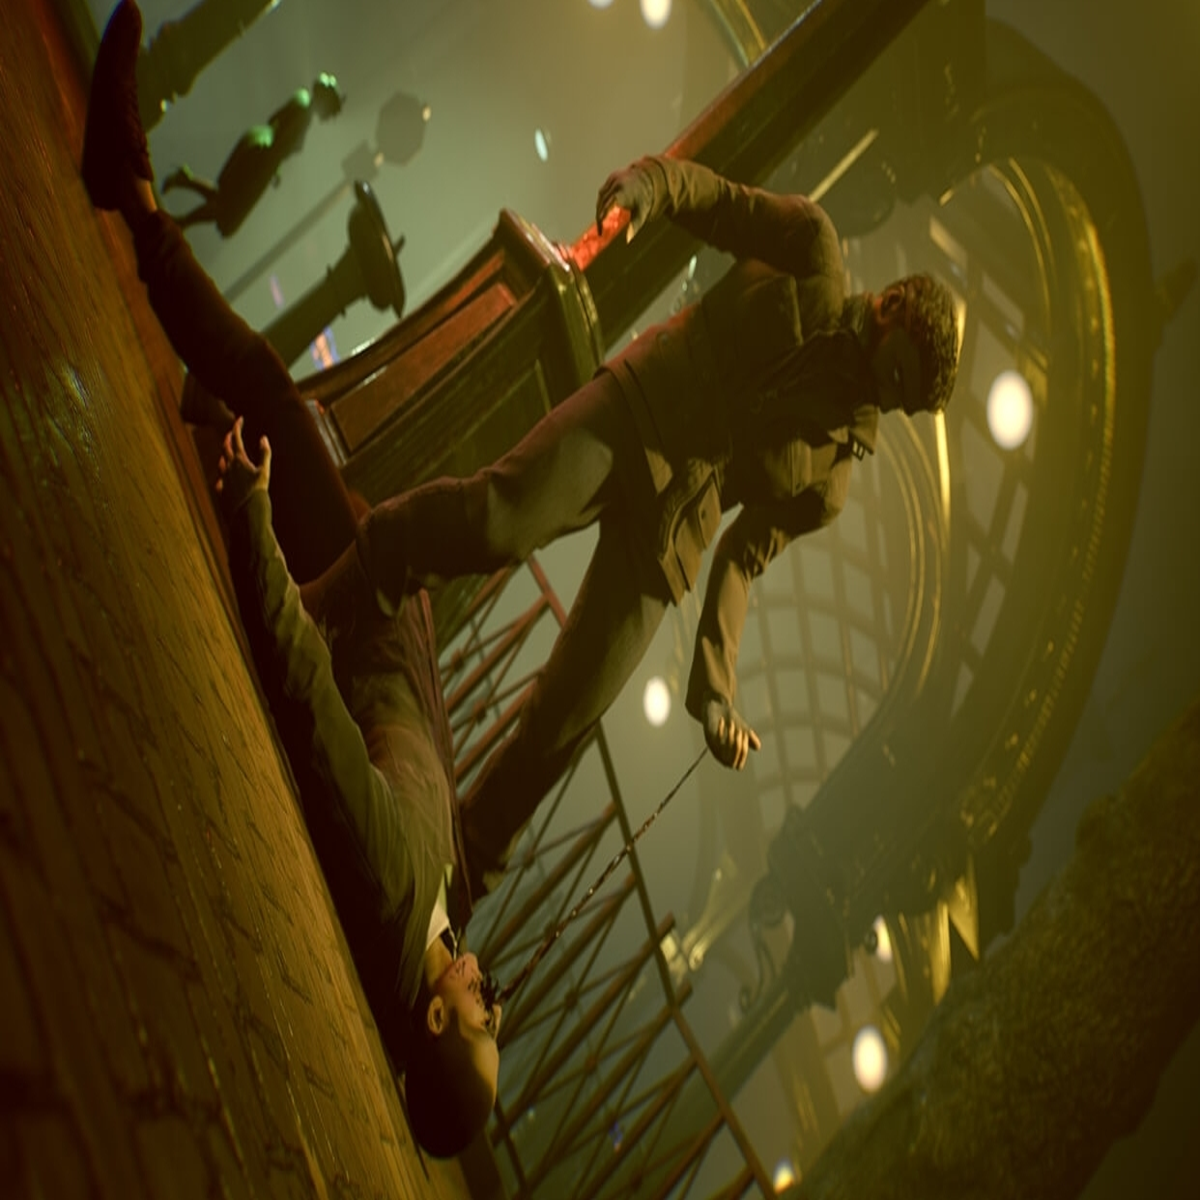 Vampire: The Masquerade - Bloodlines 2 Announces New Developer and